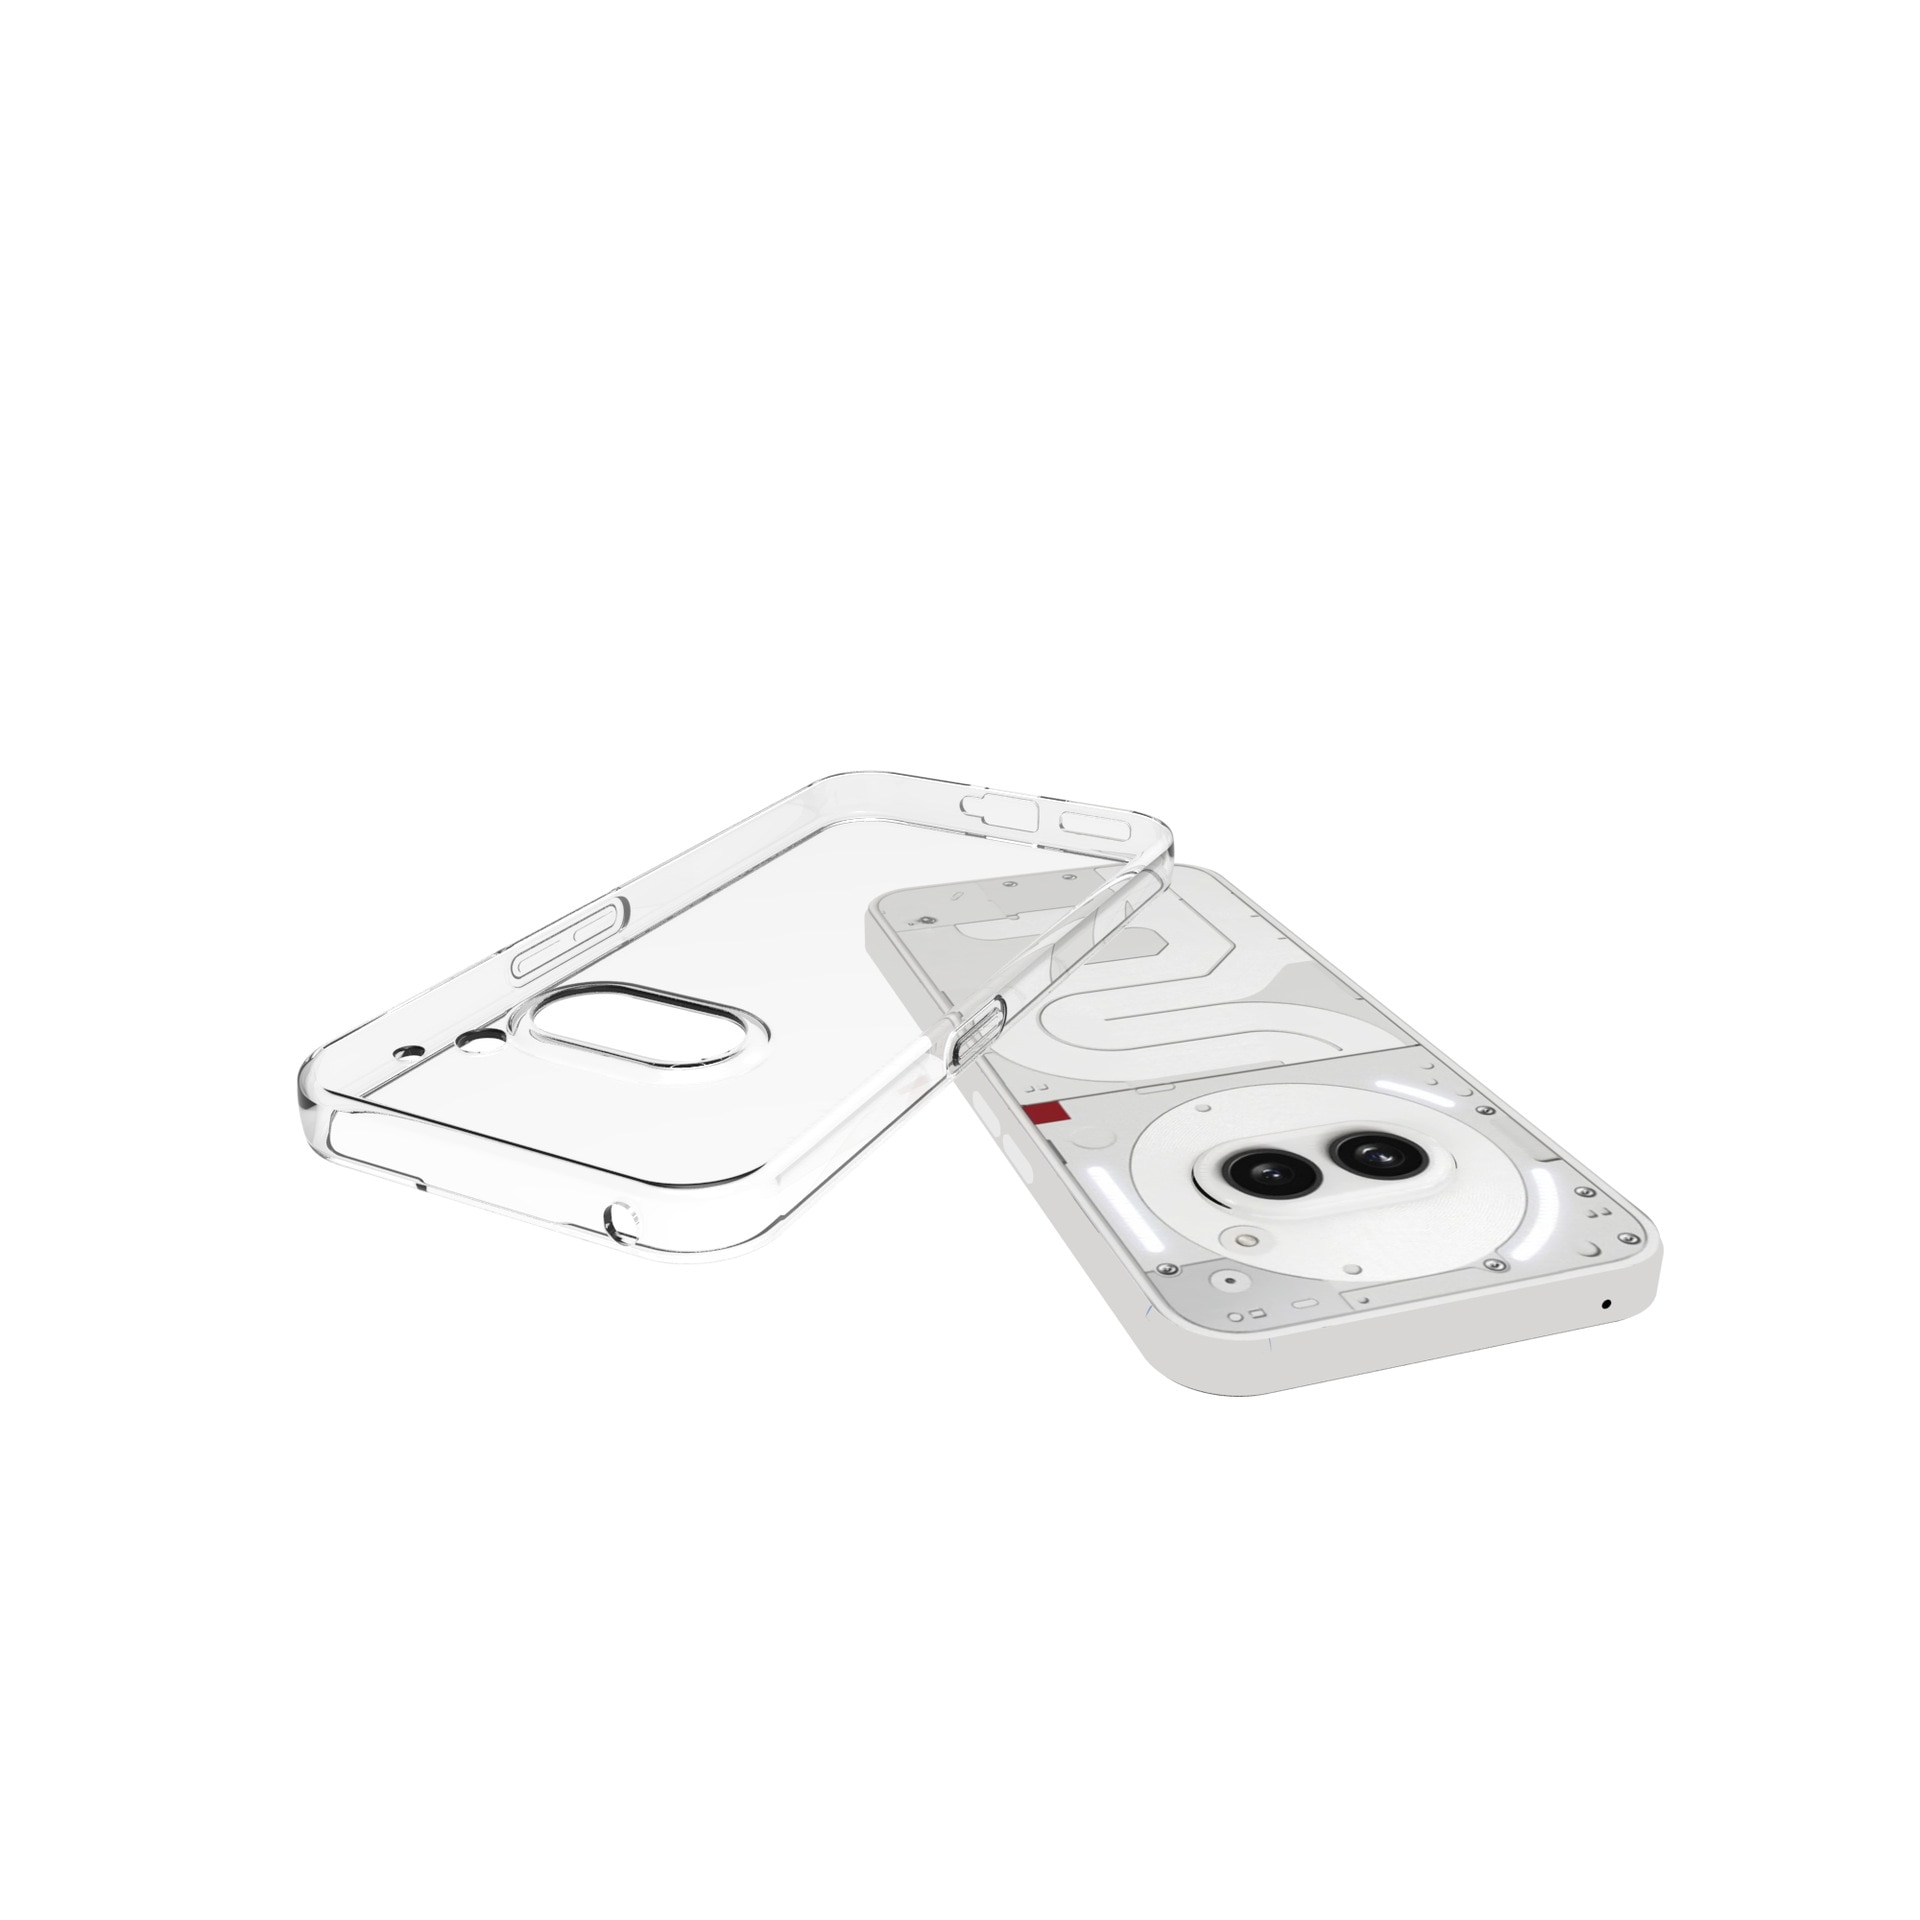 TPU Coque Nothing Phone 2a, Clear